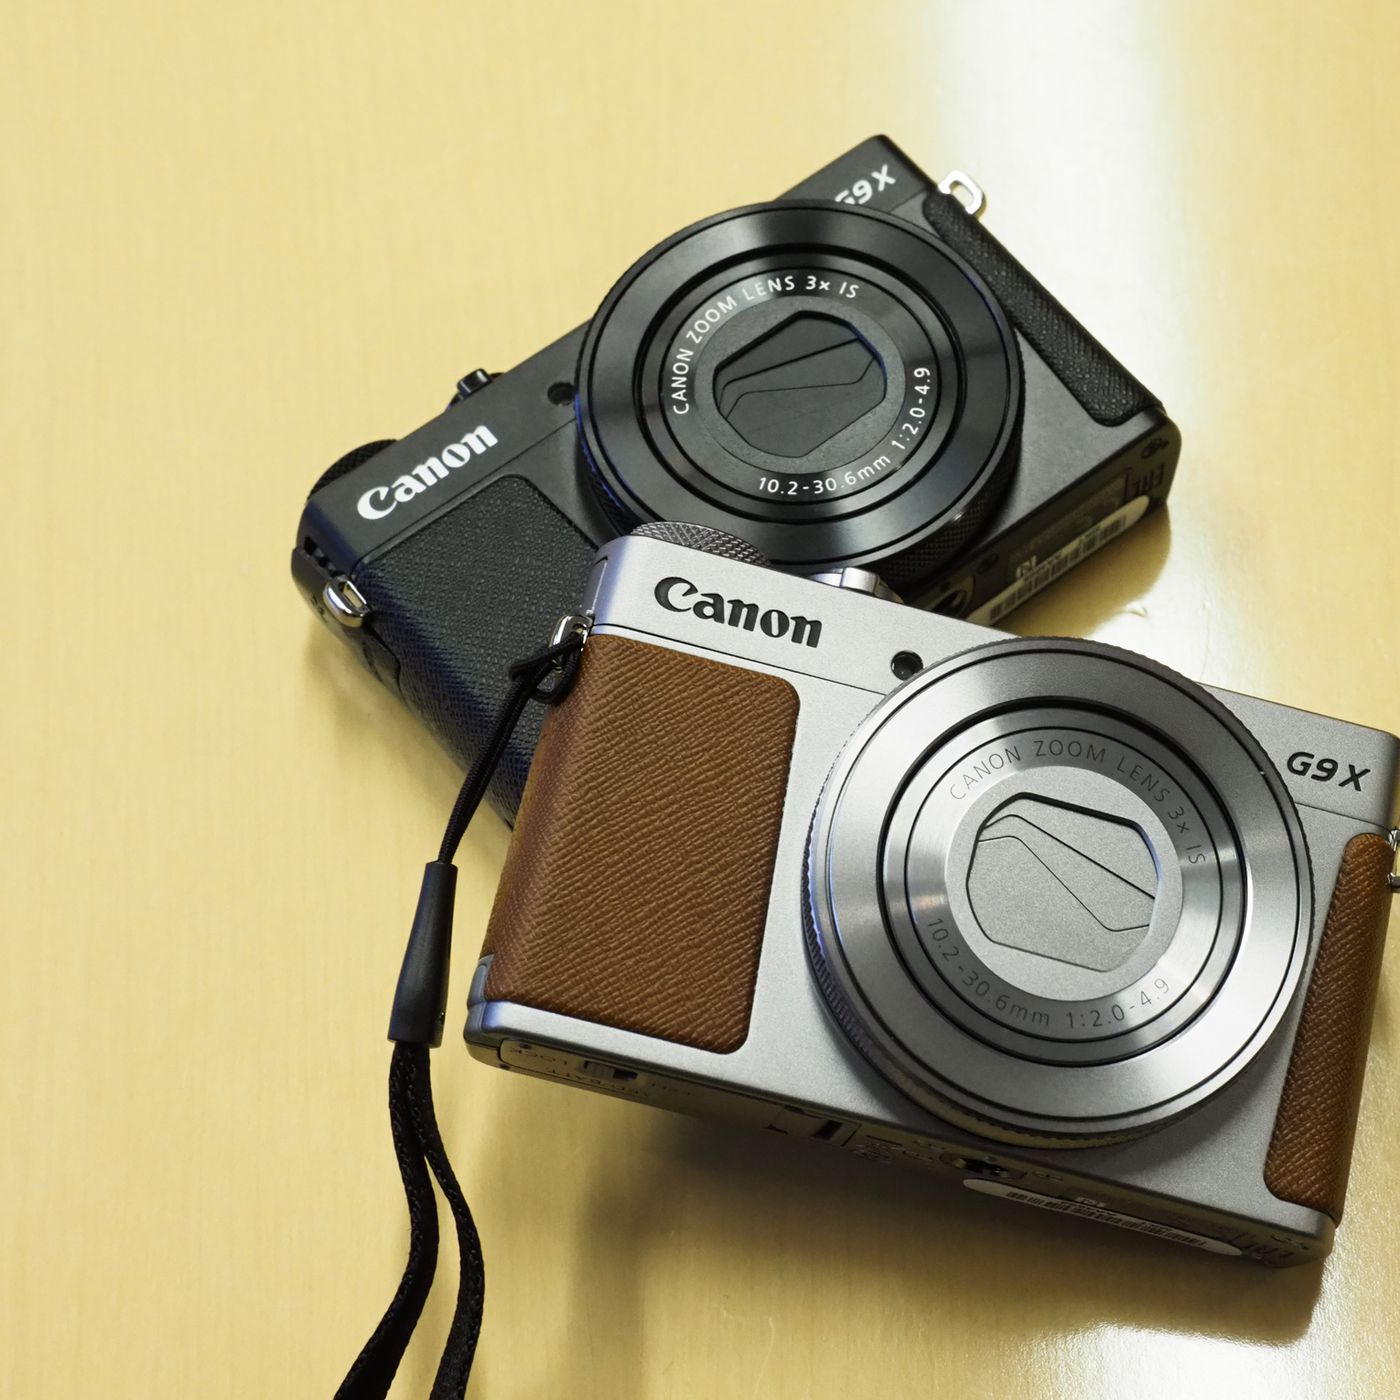 Canon's G9X Mark II is another boring update to an outmatched 